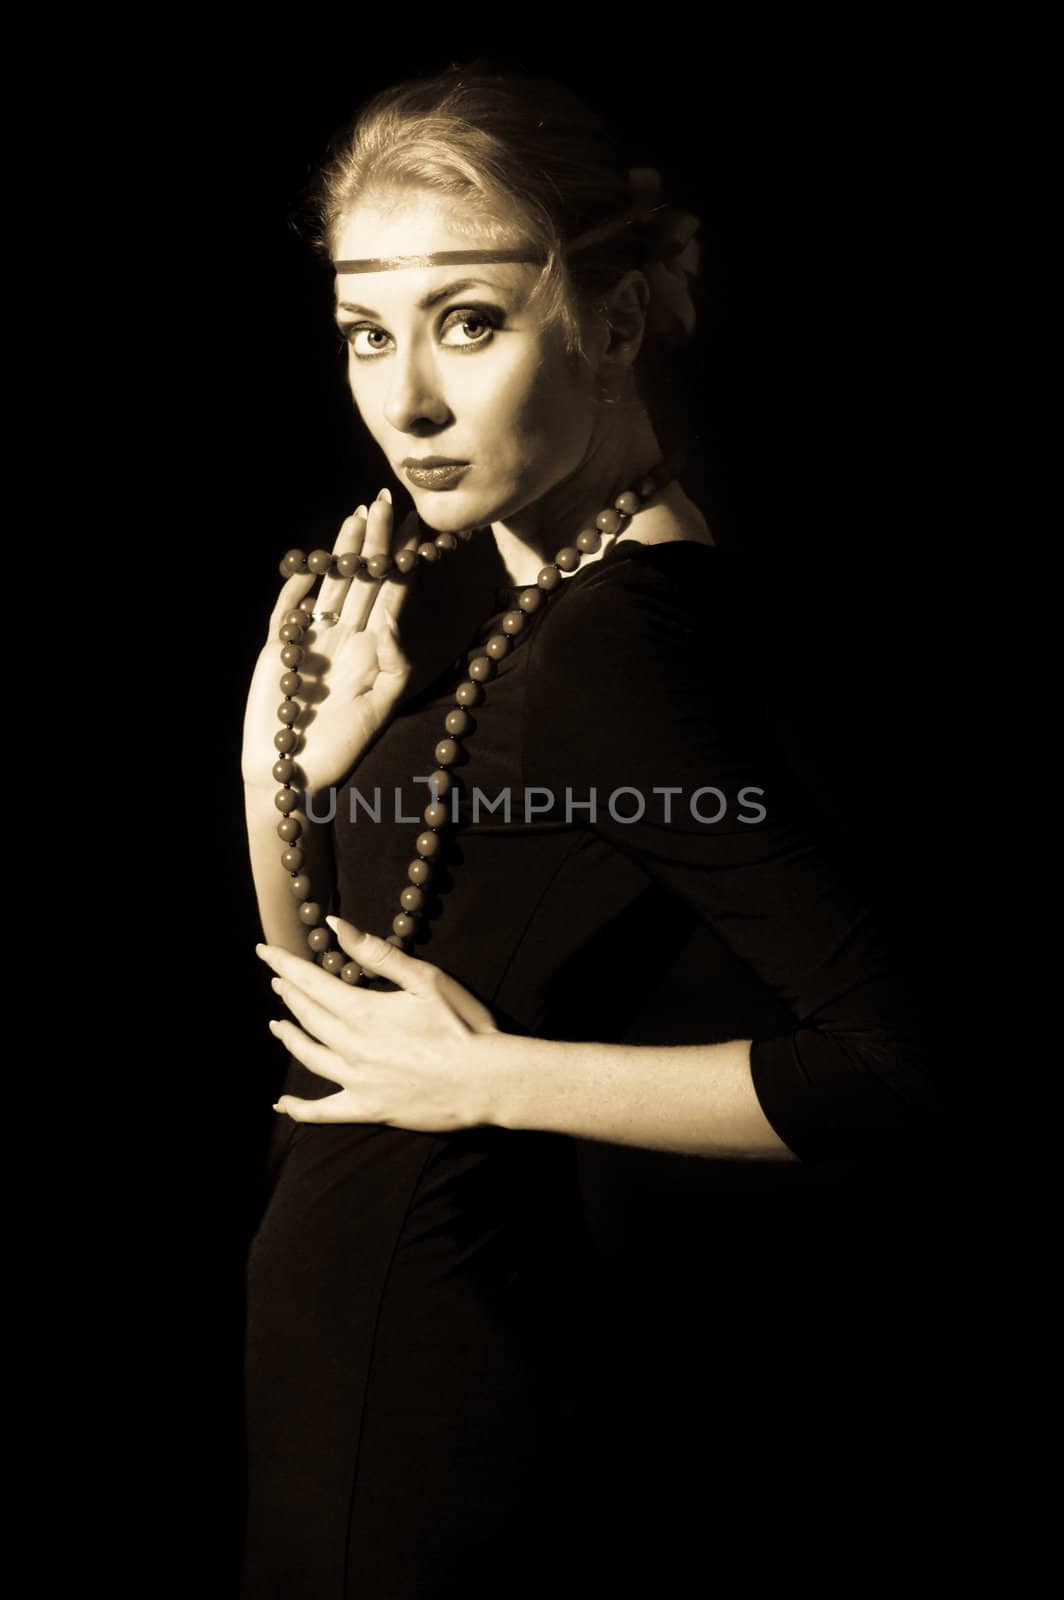 Retro style woman dress with necklace, sepia